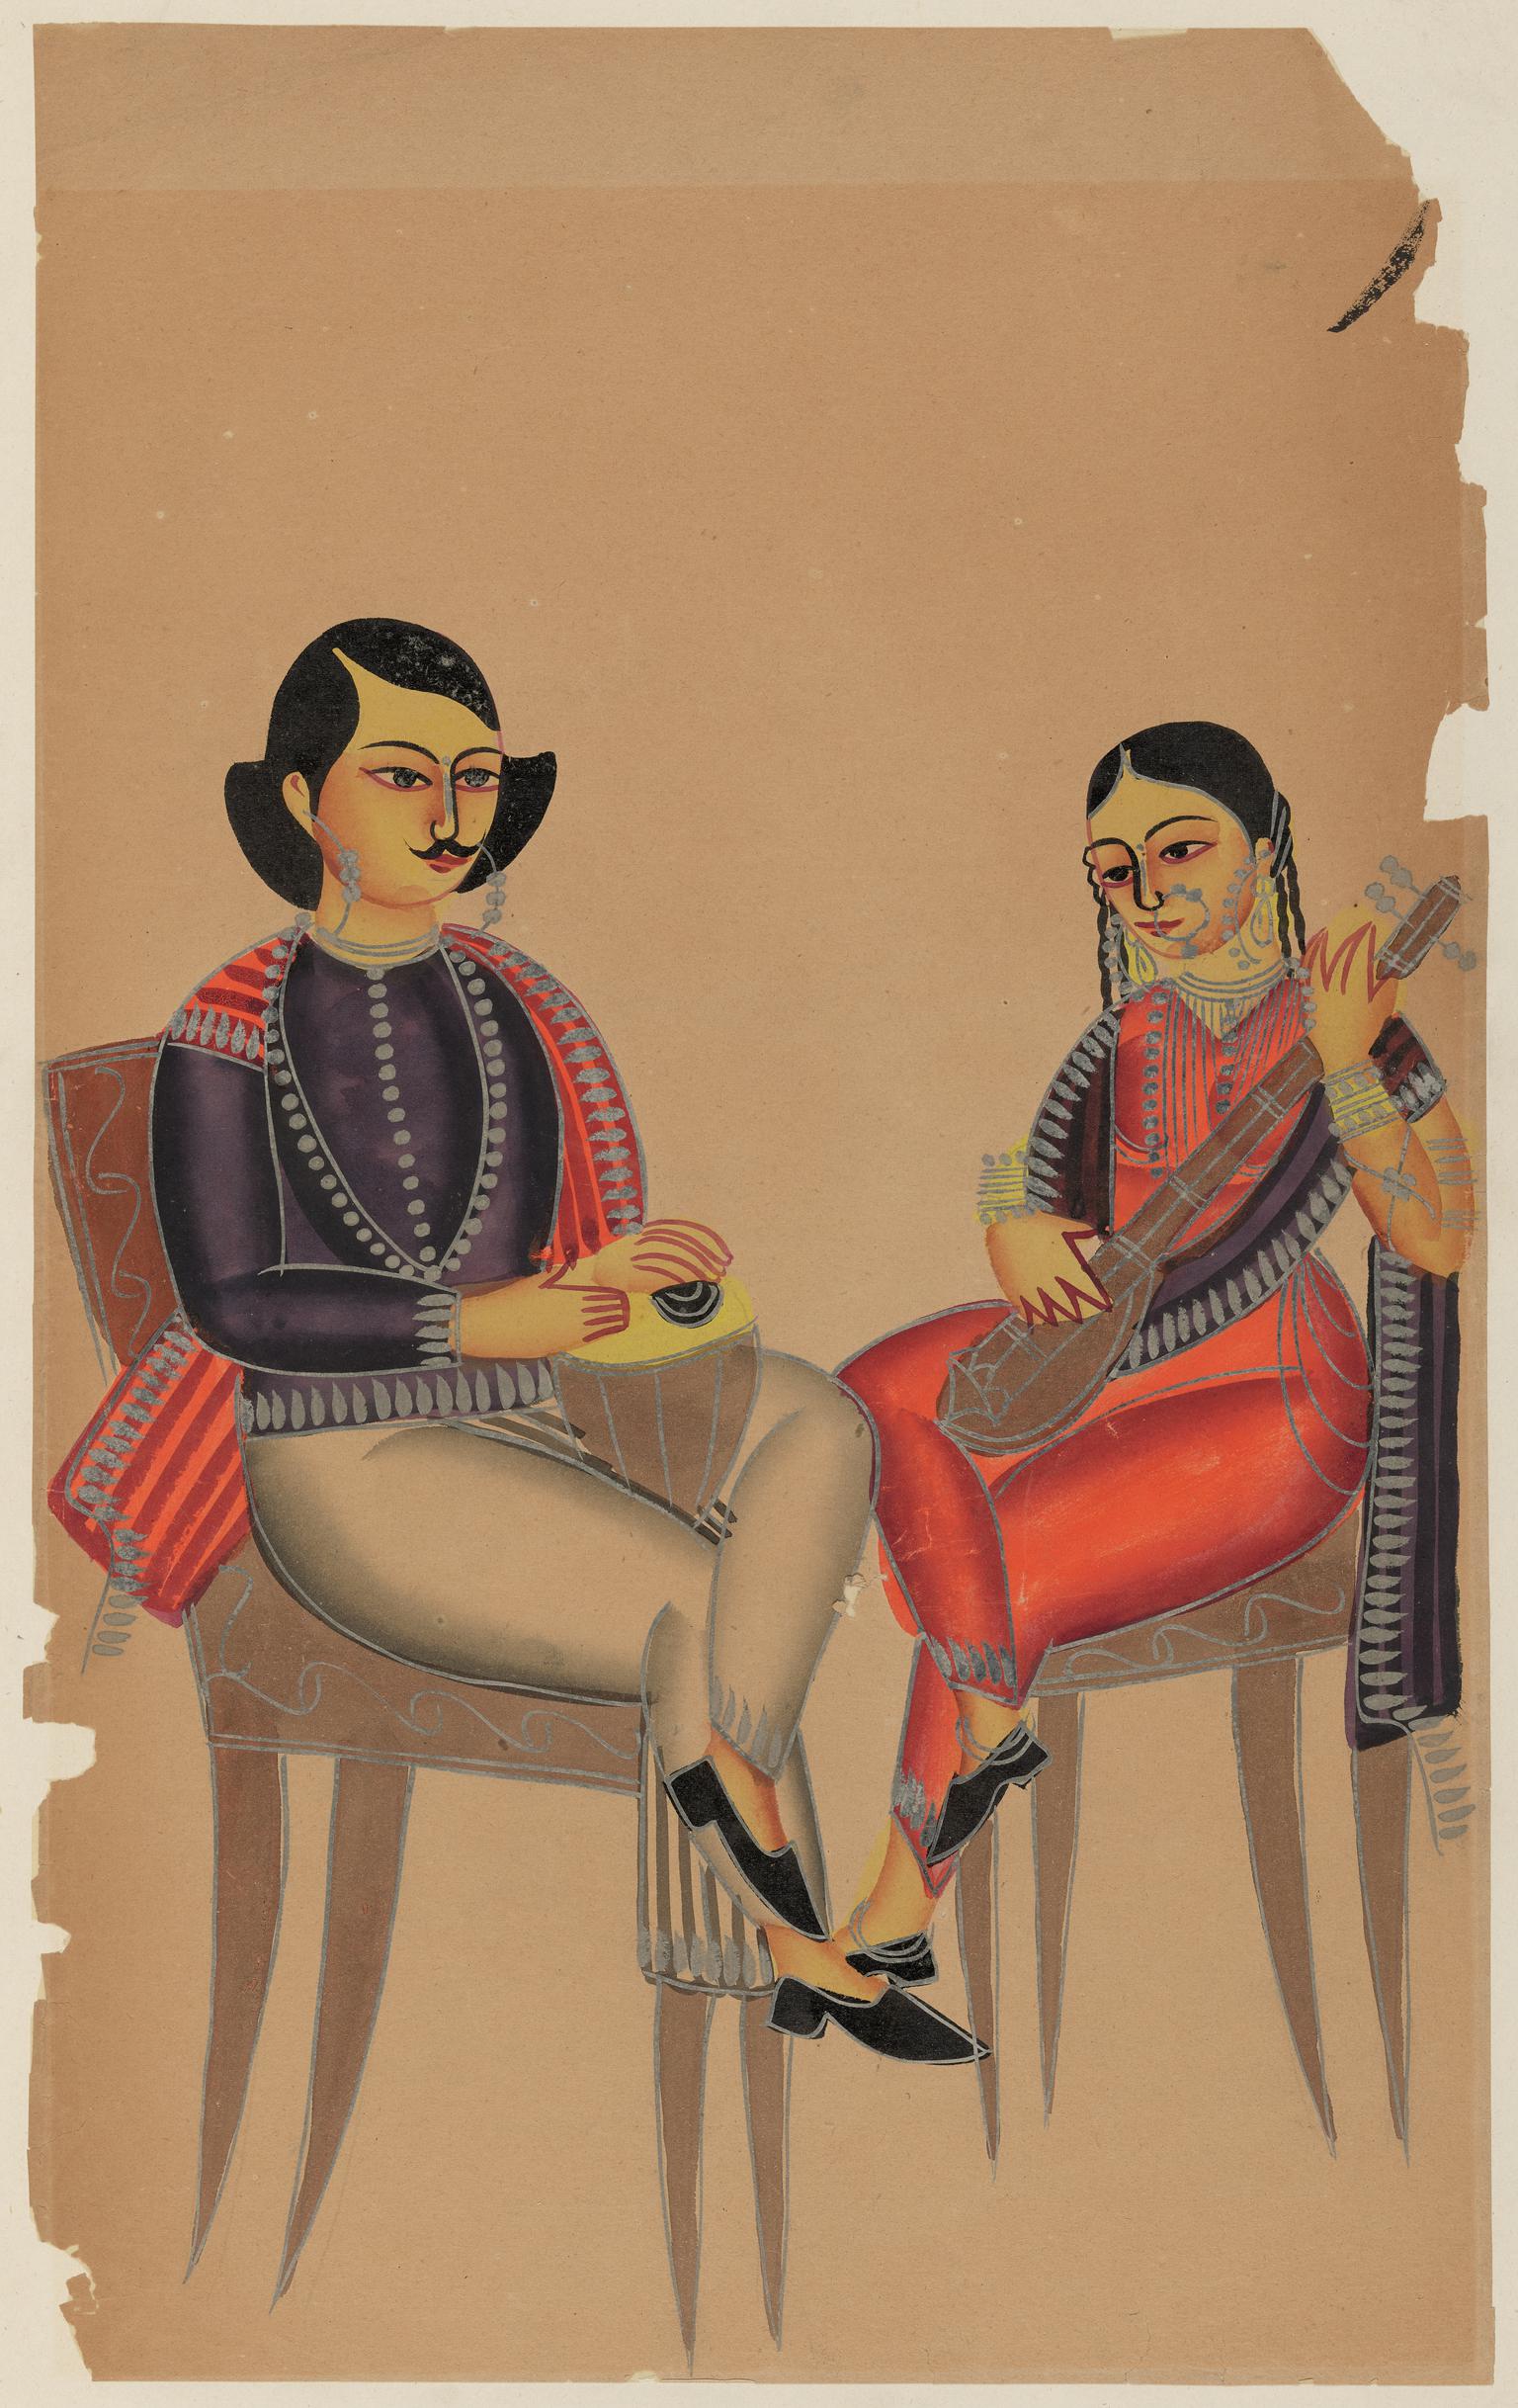 A girl playing the sitar seated with a young man who provides drum accompaniment